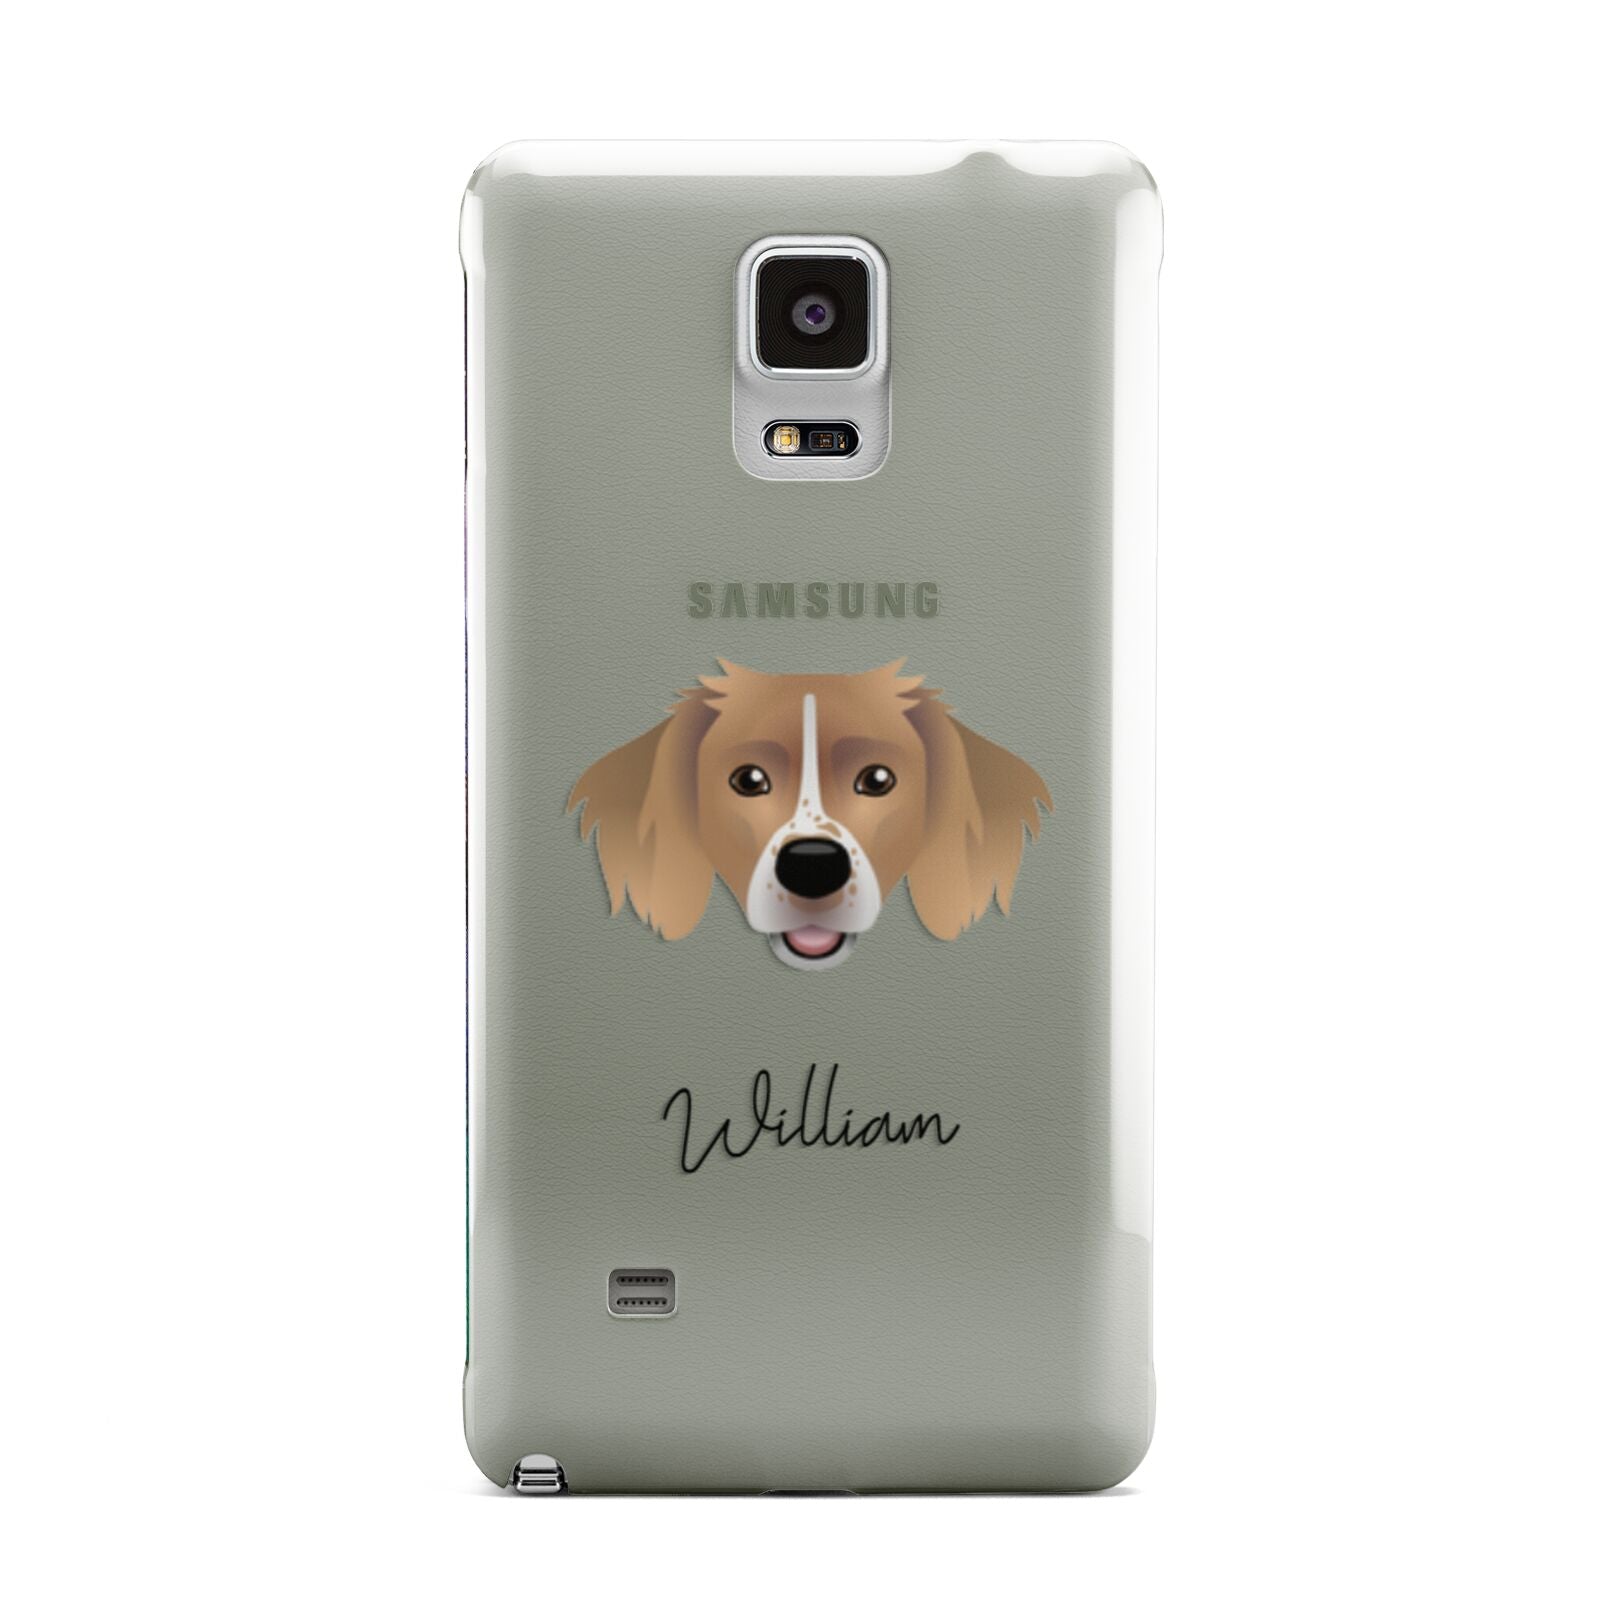 Sprollie Personalised Samsung Galaxy Note 4 Case